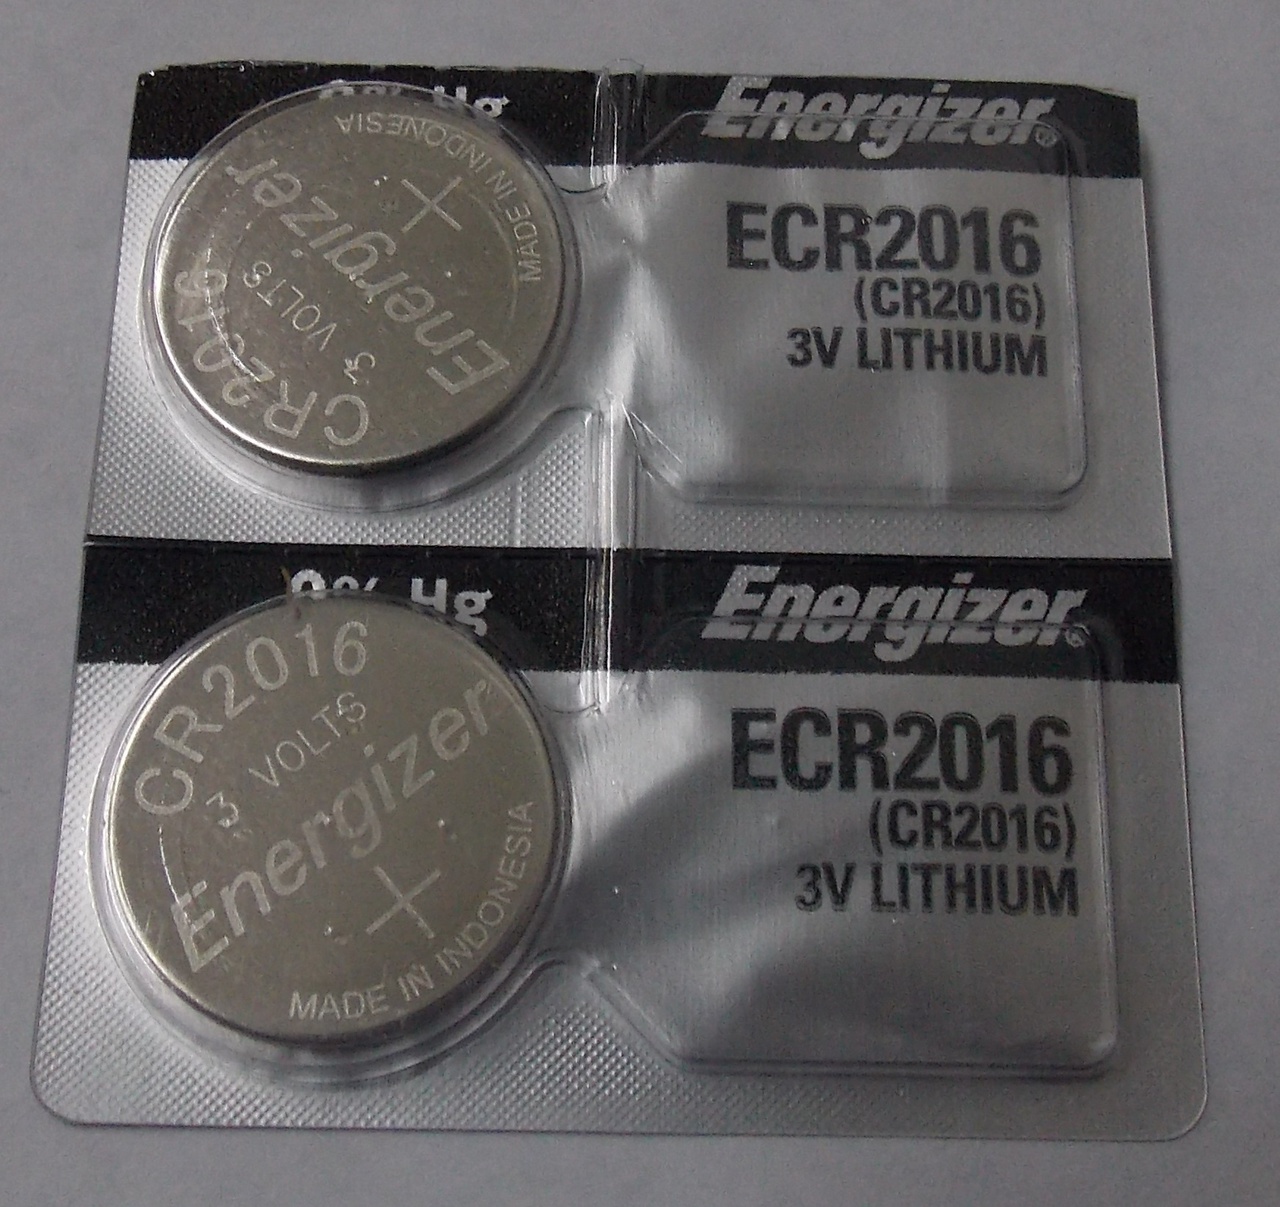 Energizer CR2016 3V Lithium Coin Battery - 2 Pack + FREE SHIPPING!